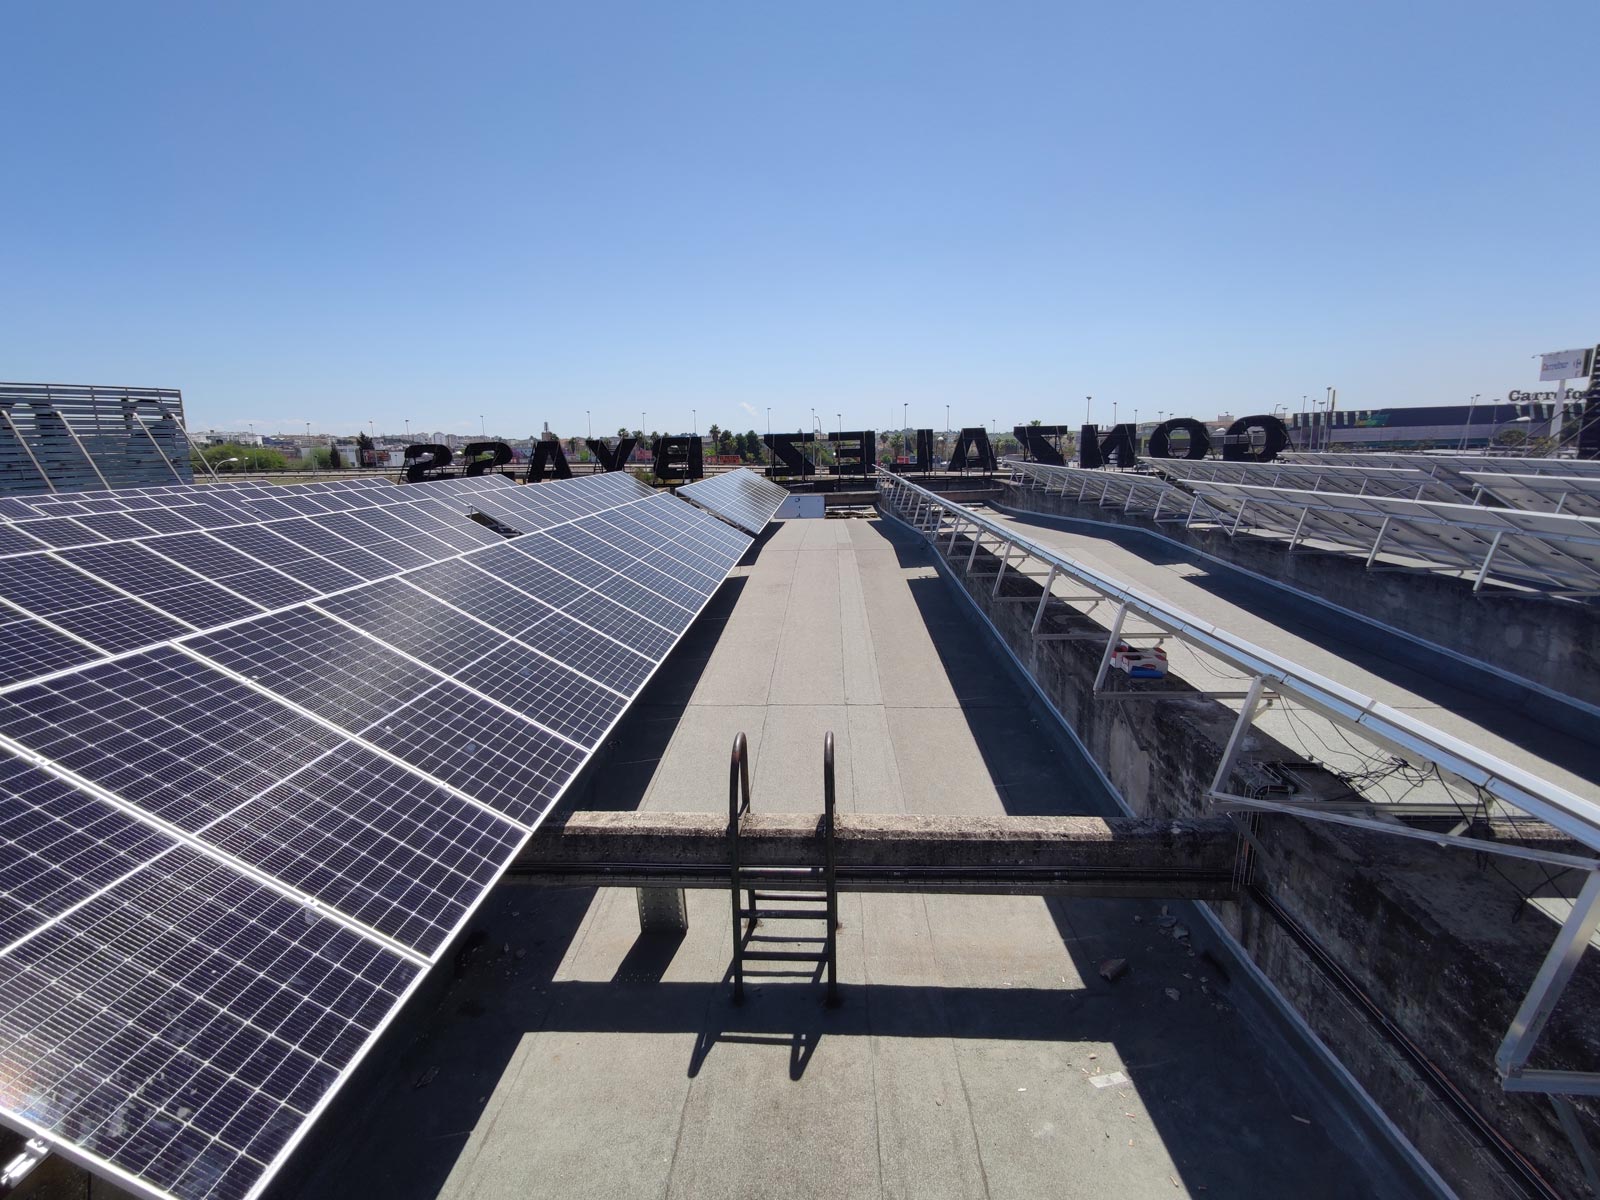 Construction of a photovoltaic installation by Iberdrola Smart Solar